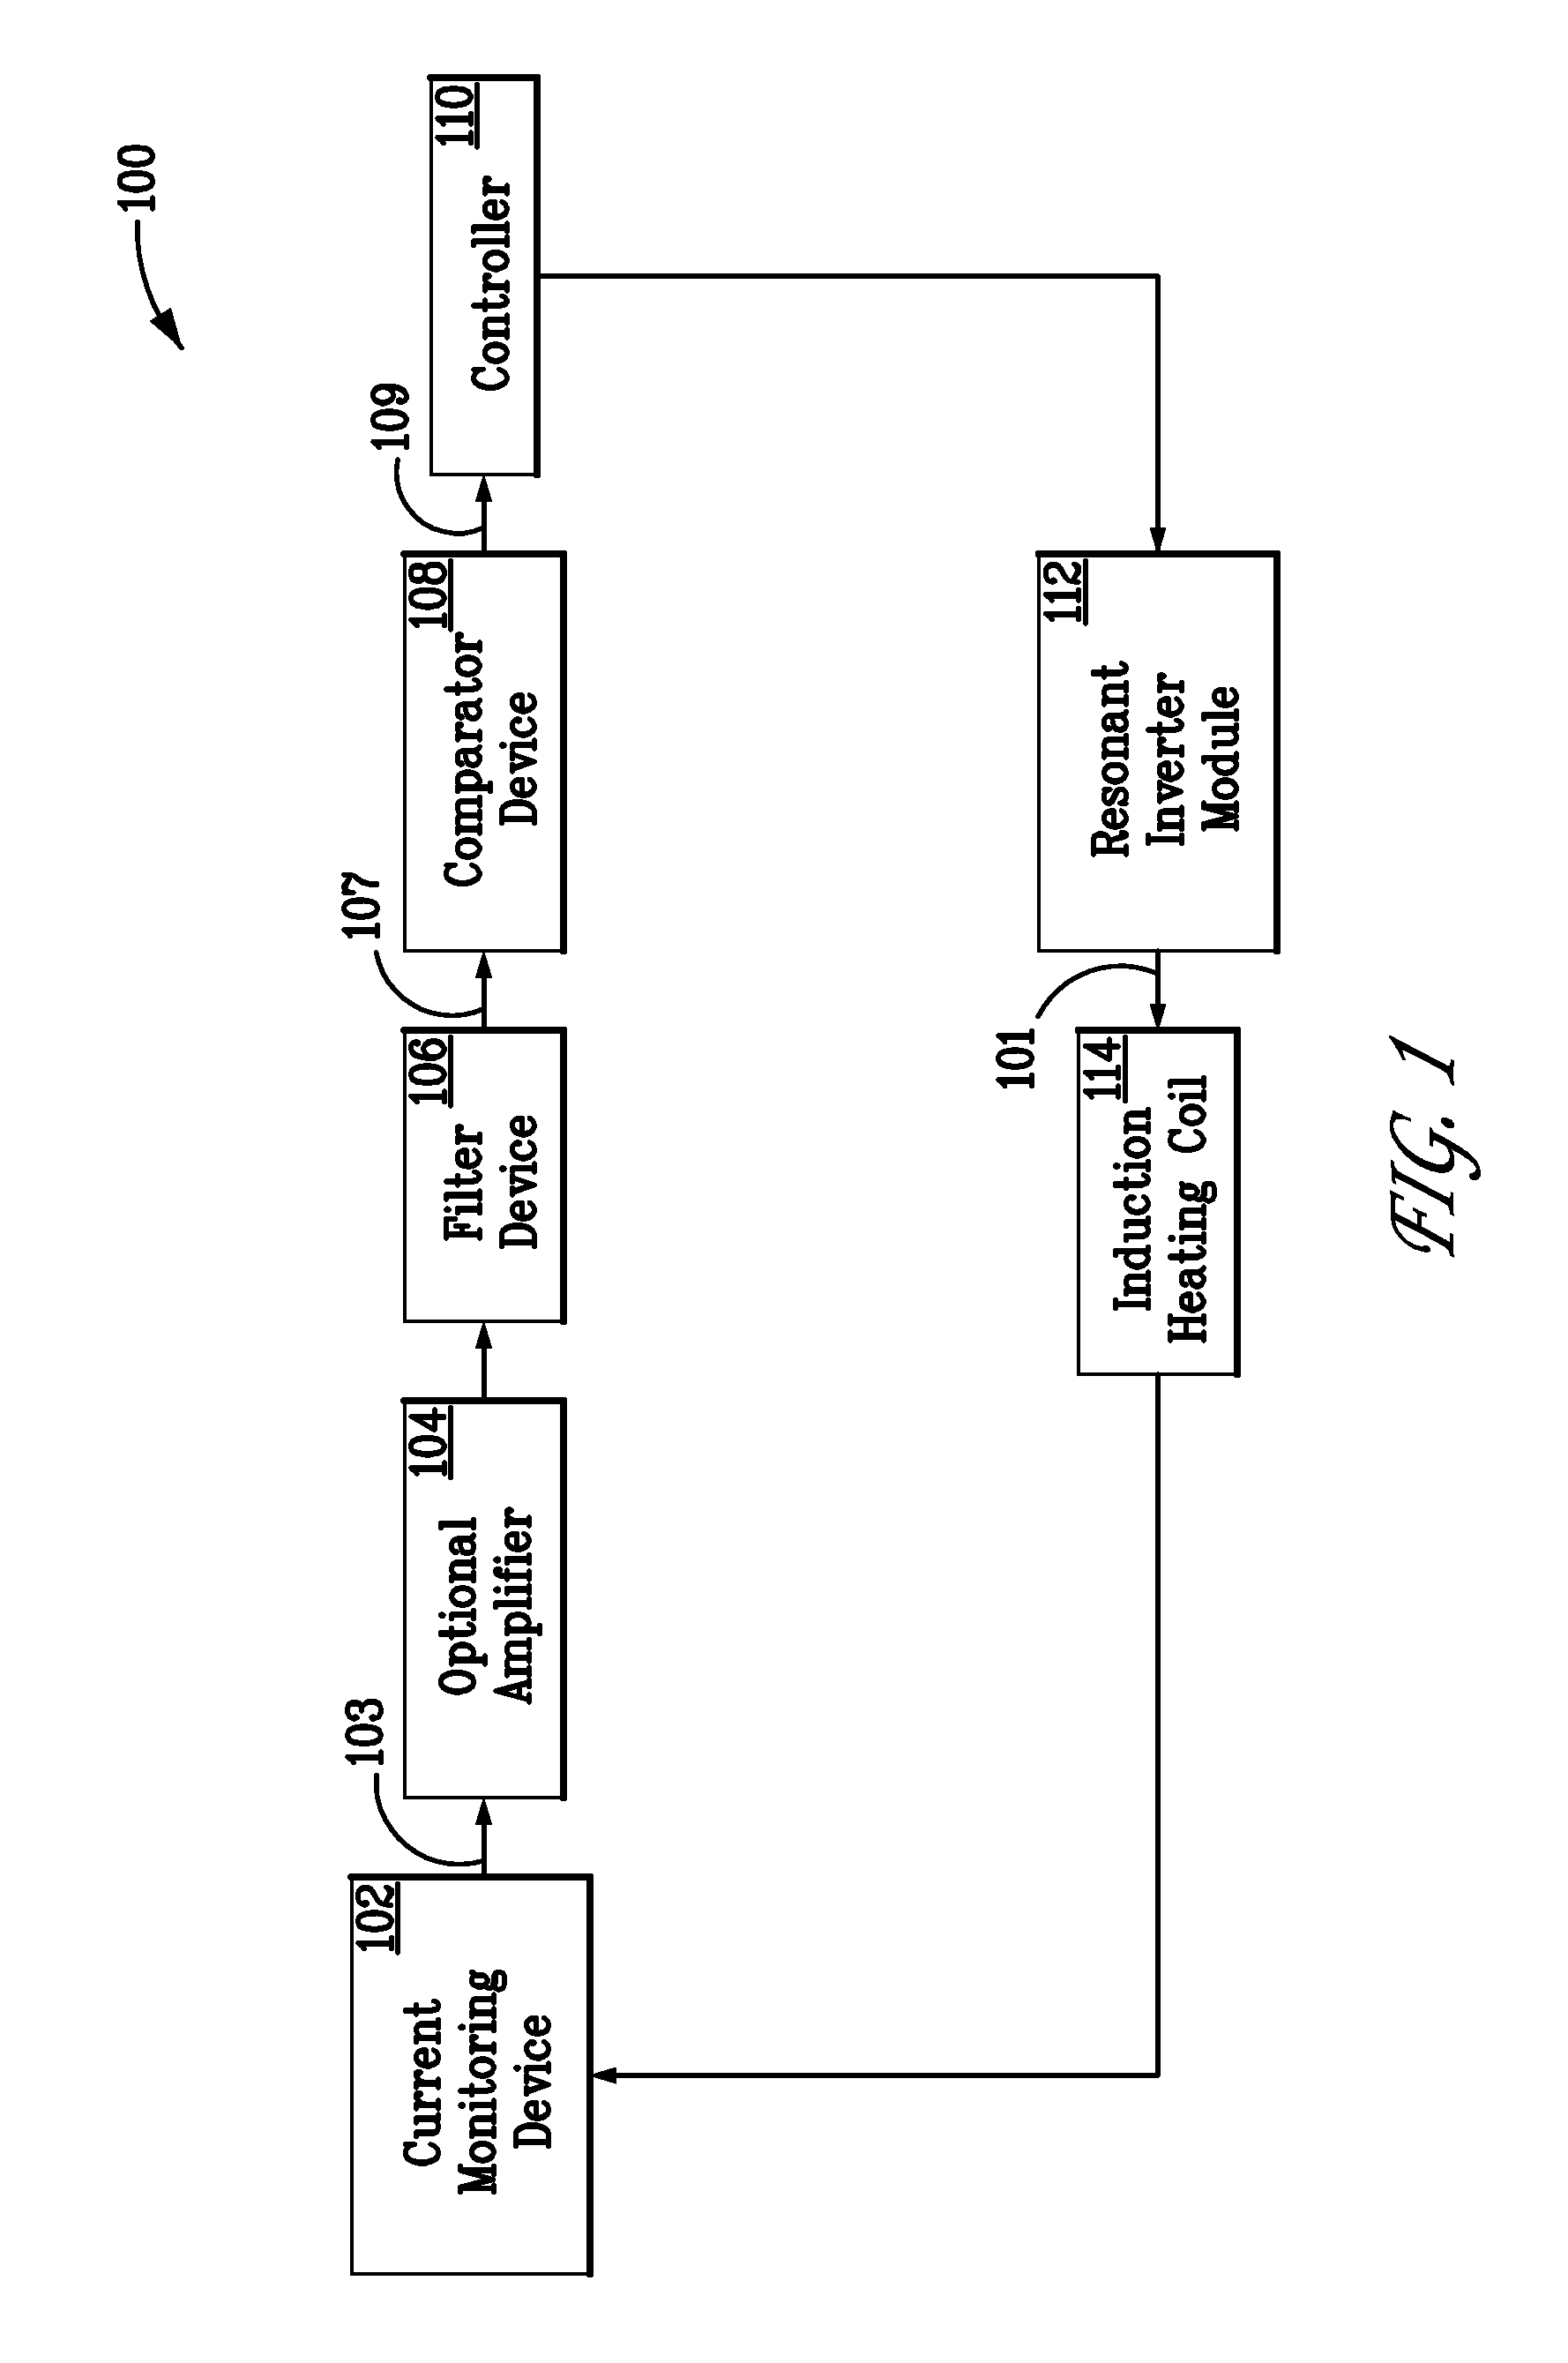 Resonant frequency detection for induction resonant inverter